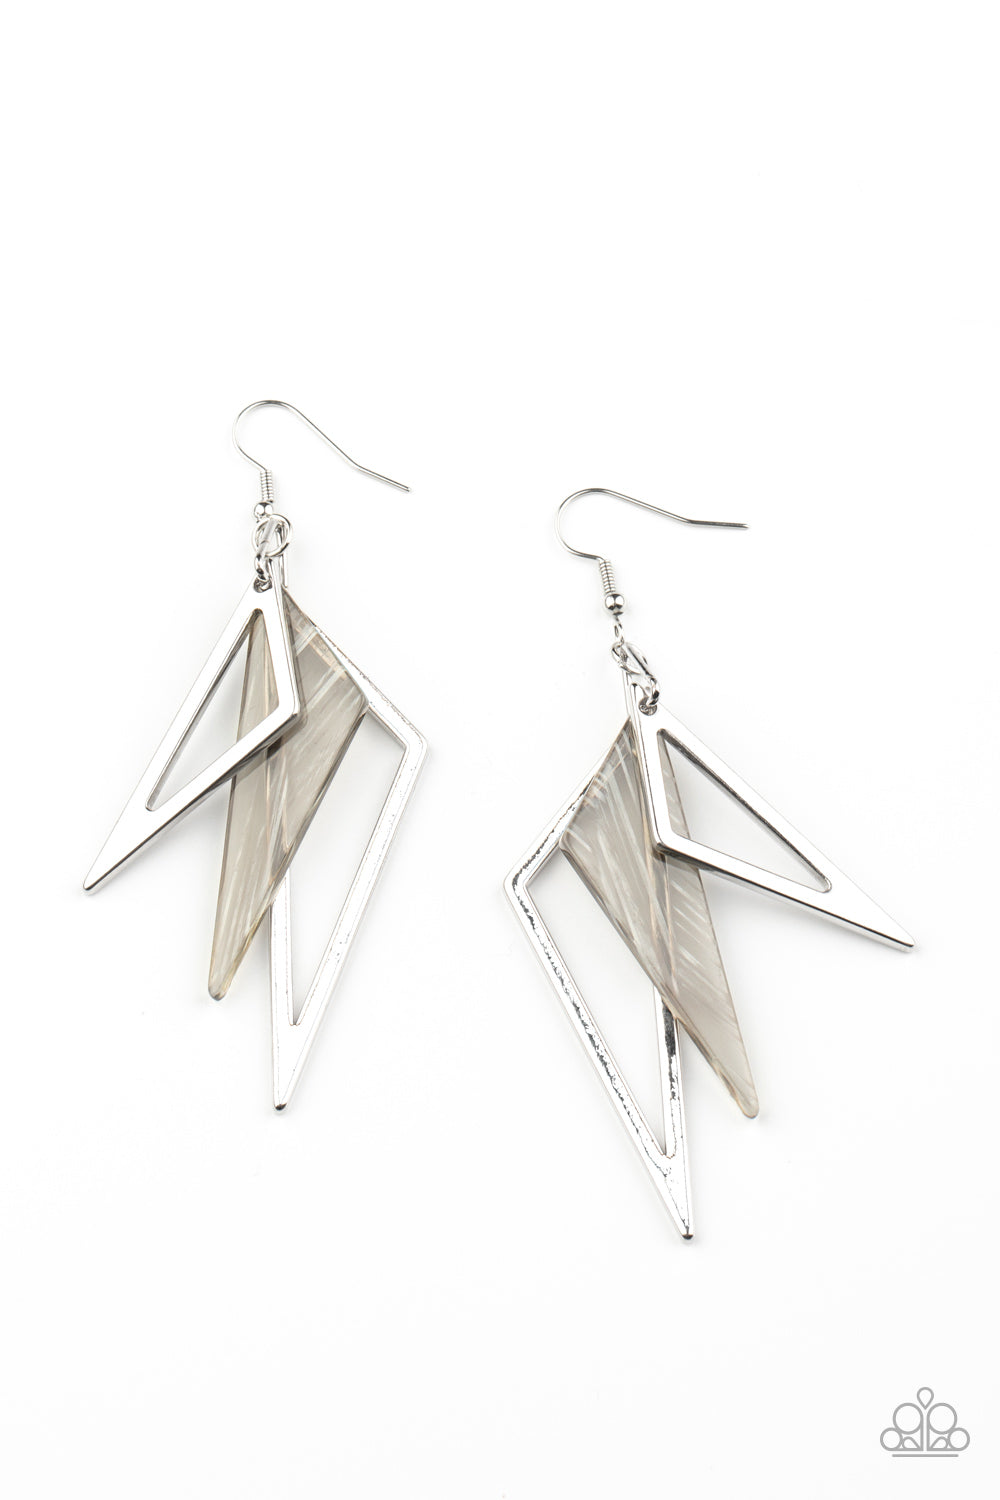 Paparazzi Evolutionary Edge - Silver Acrylic Earrings - A Finishing Touch Jewelry